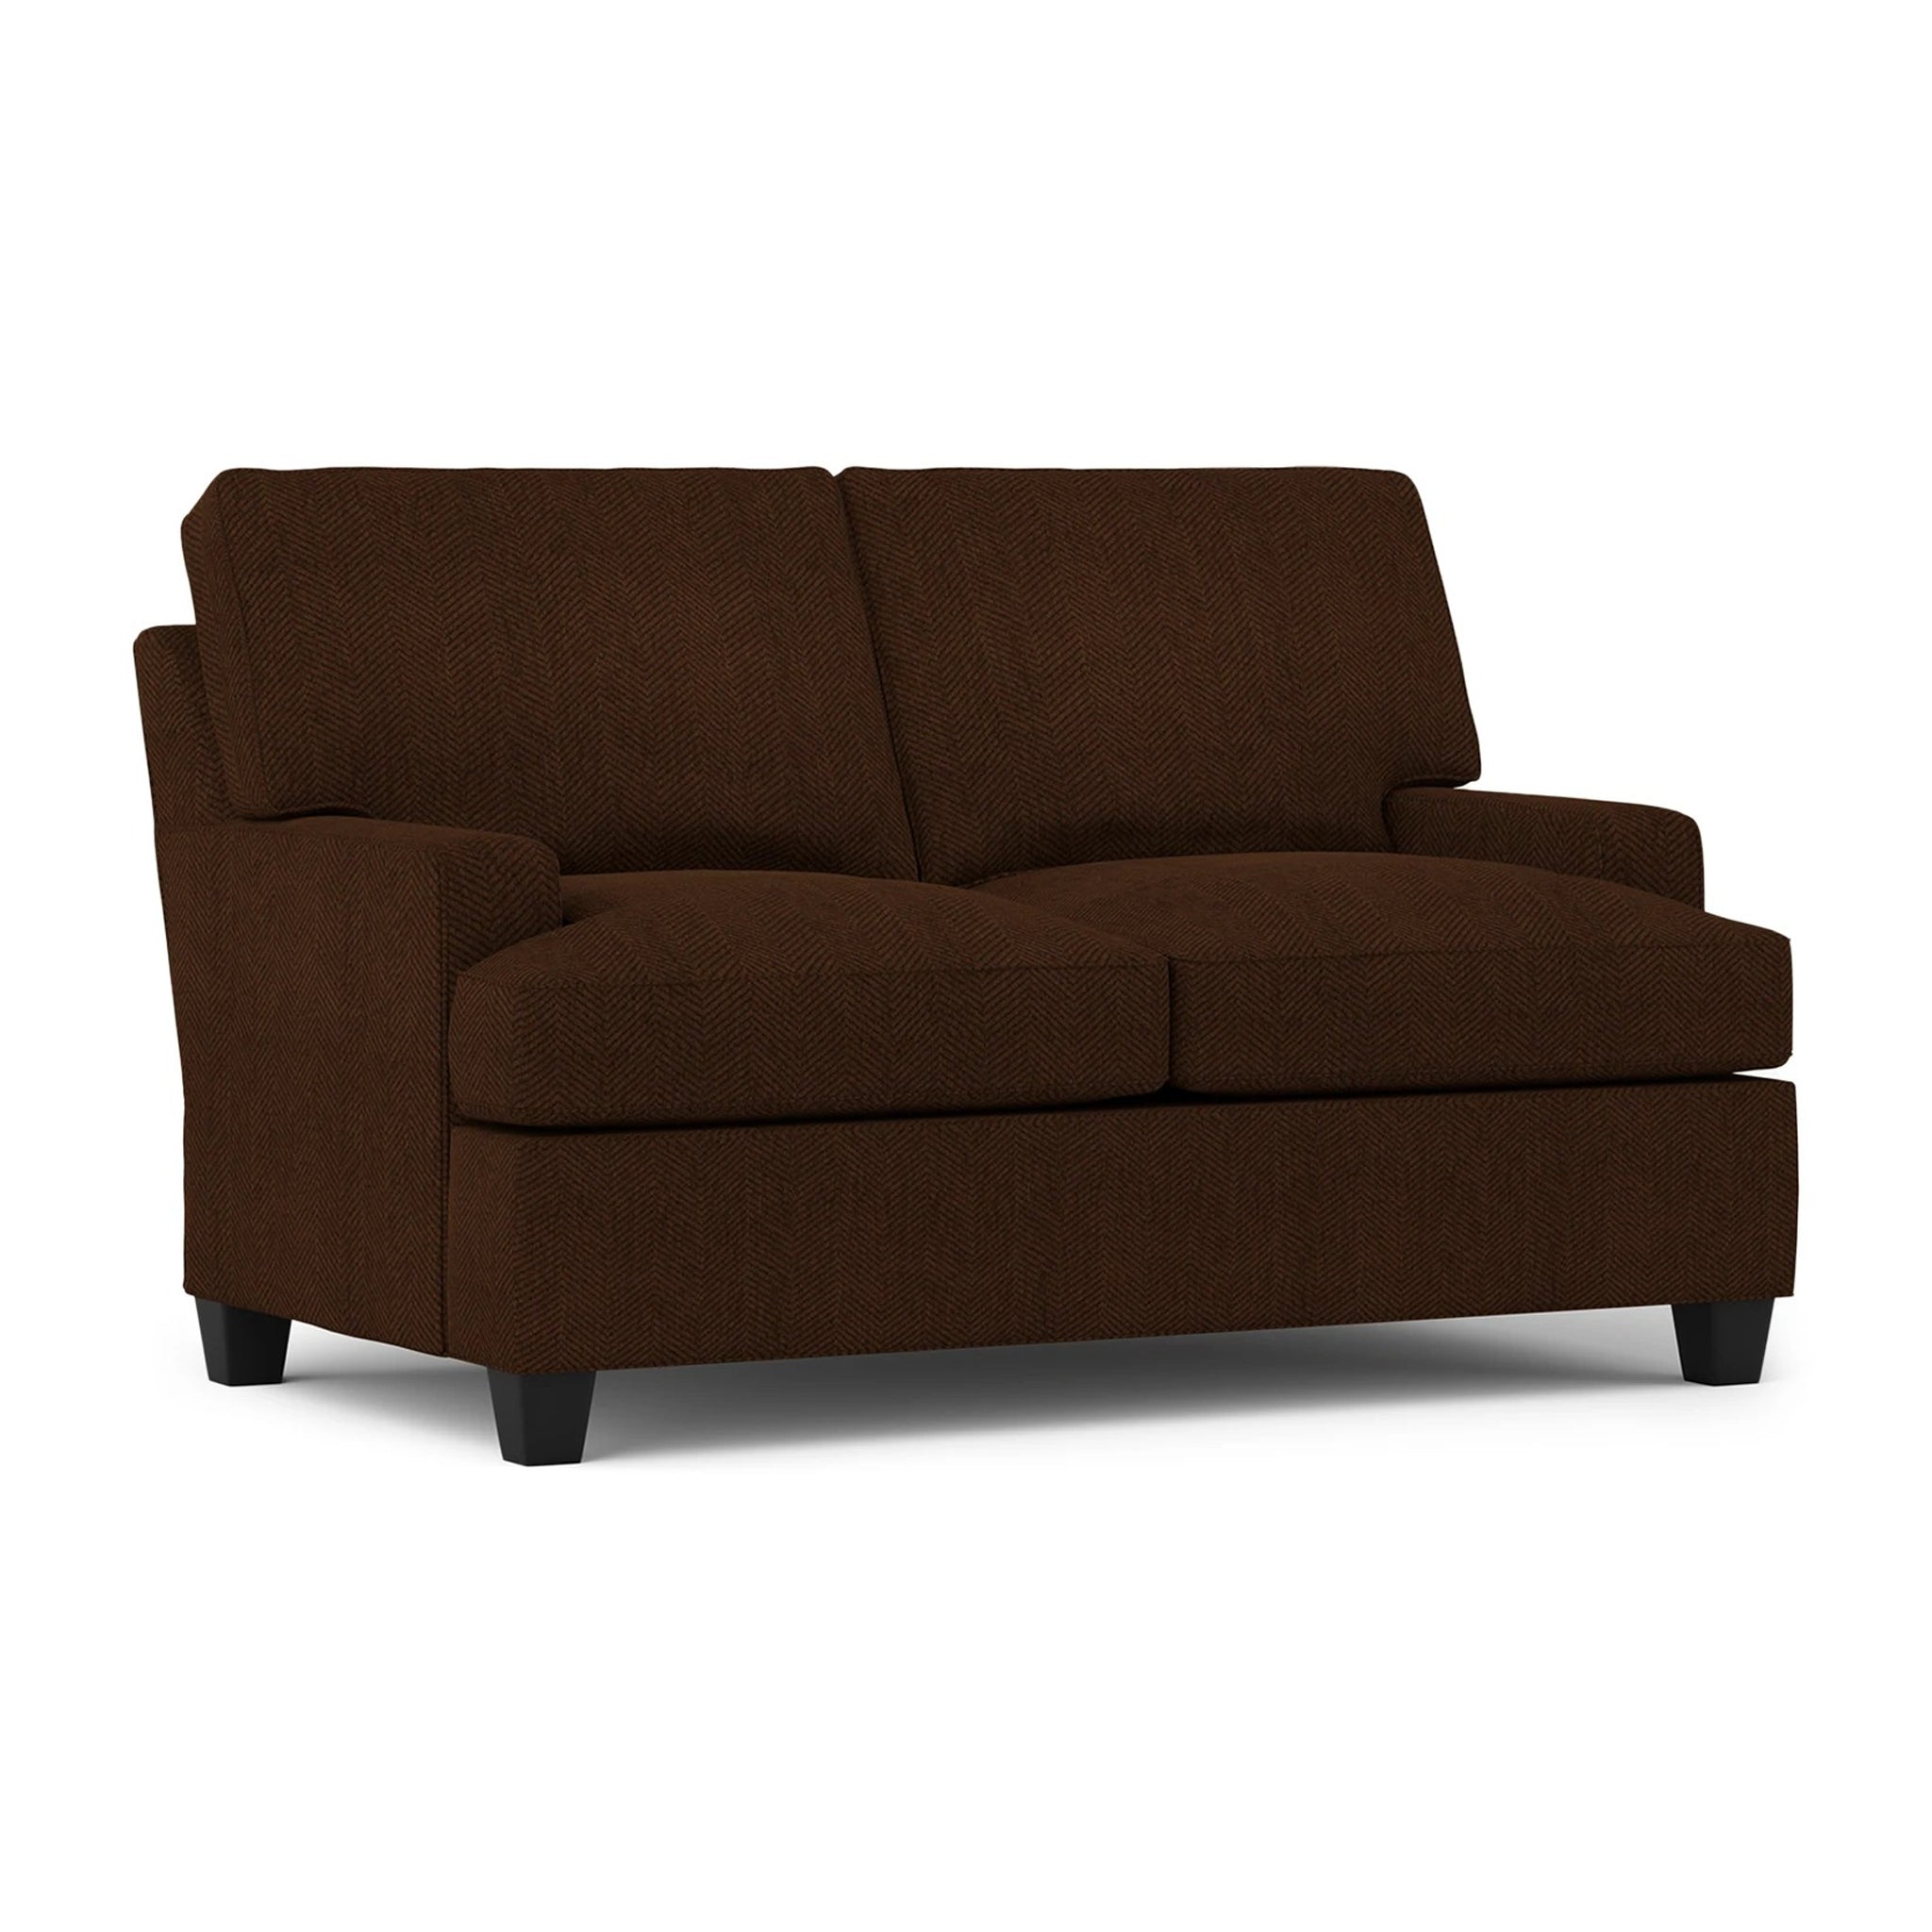 The Crag House Collection - Loveseat